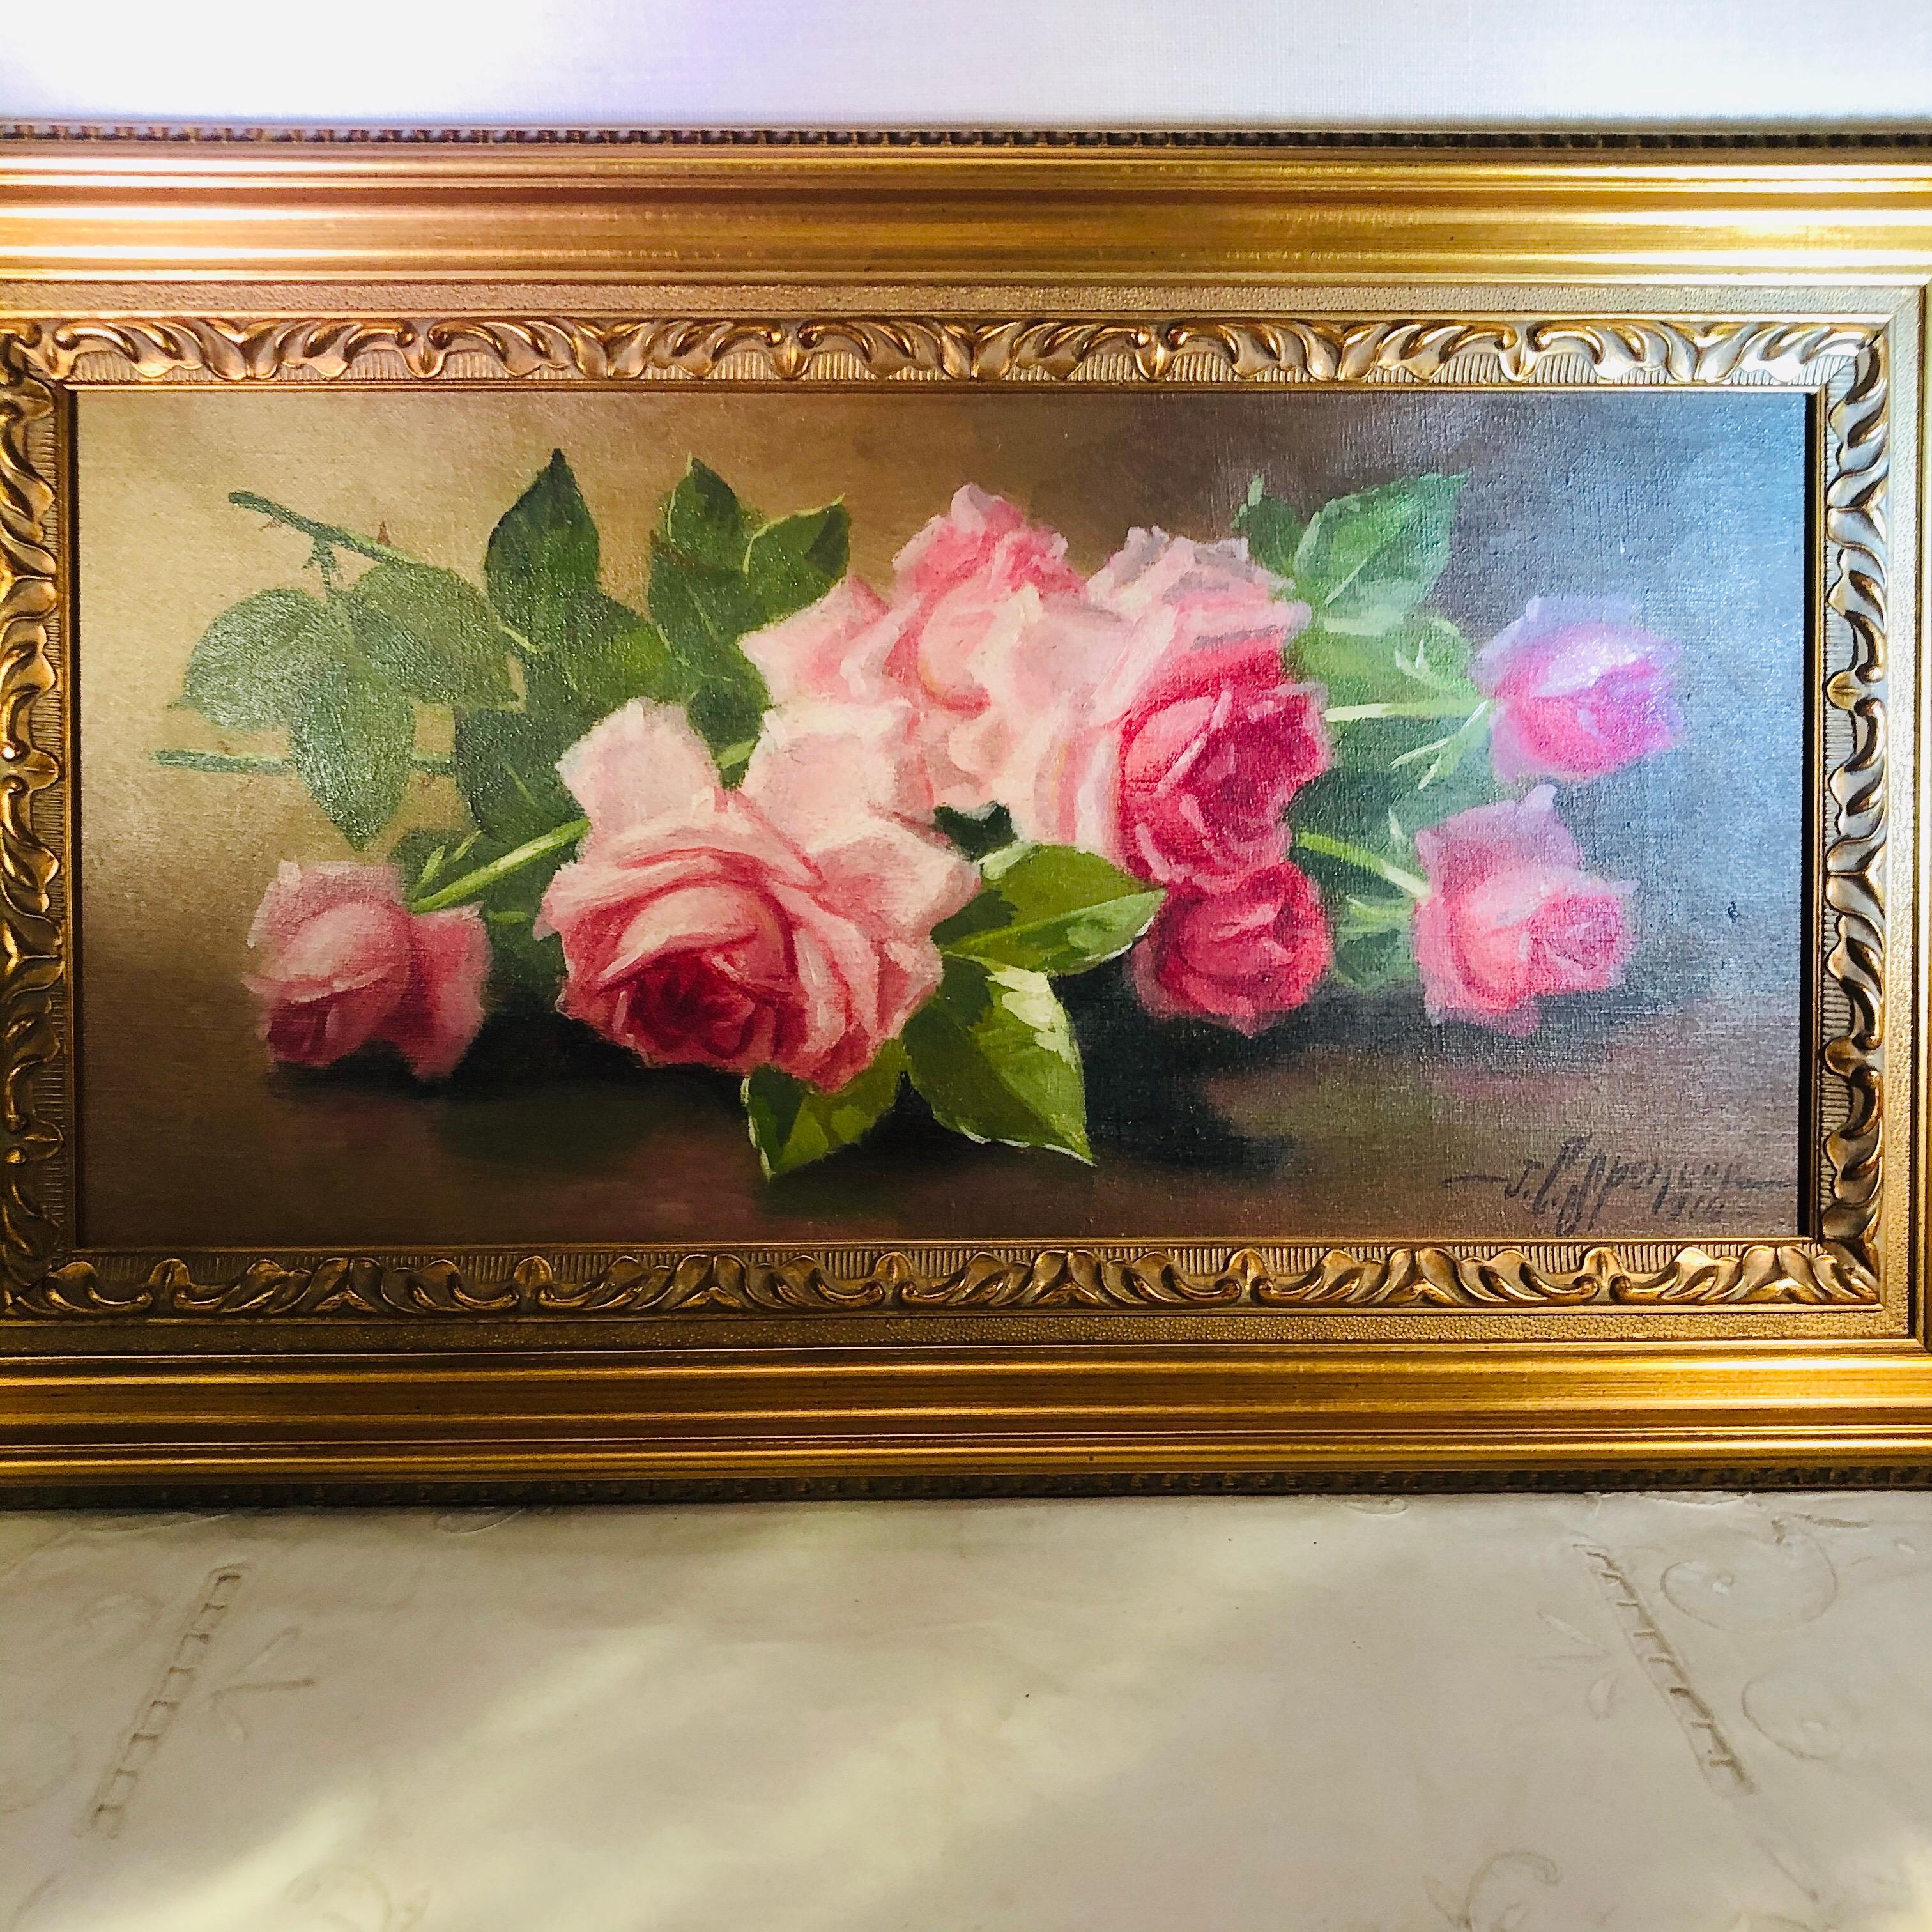 Early 20th Century Oil on Canvas of Pink Roses Signed J. C. Spencer and Dated 1916